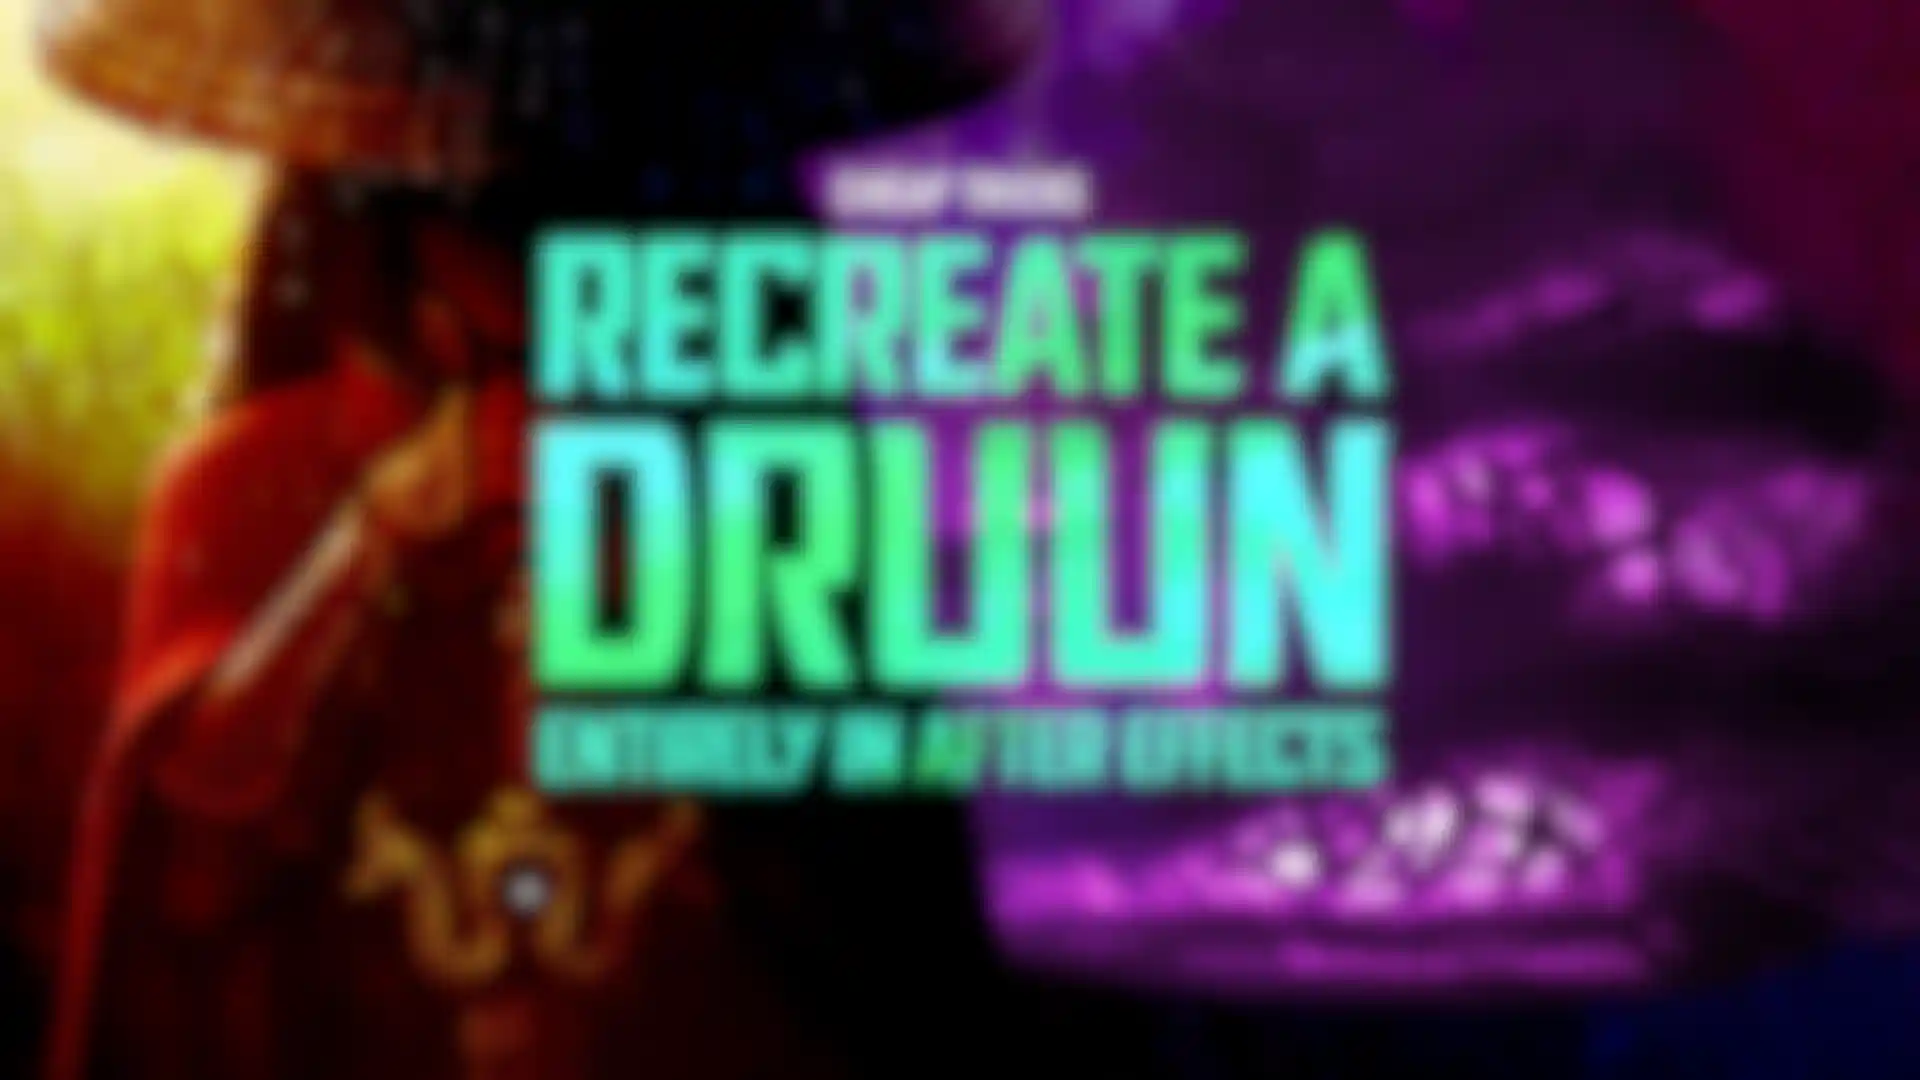 New Cheap Tricks! Recreate the Druun from Raya and the Last Dragon image